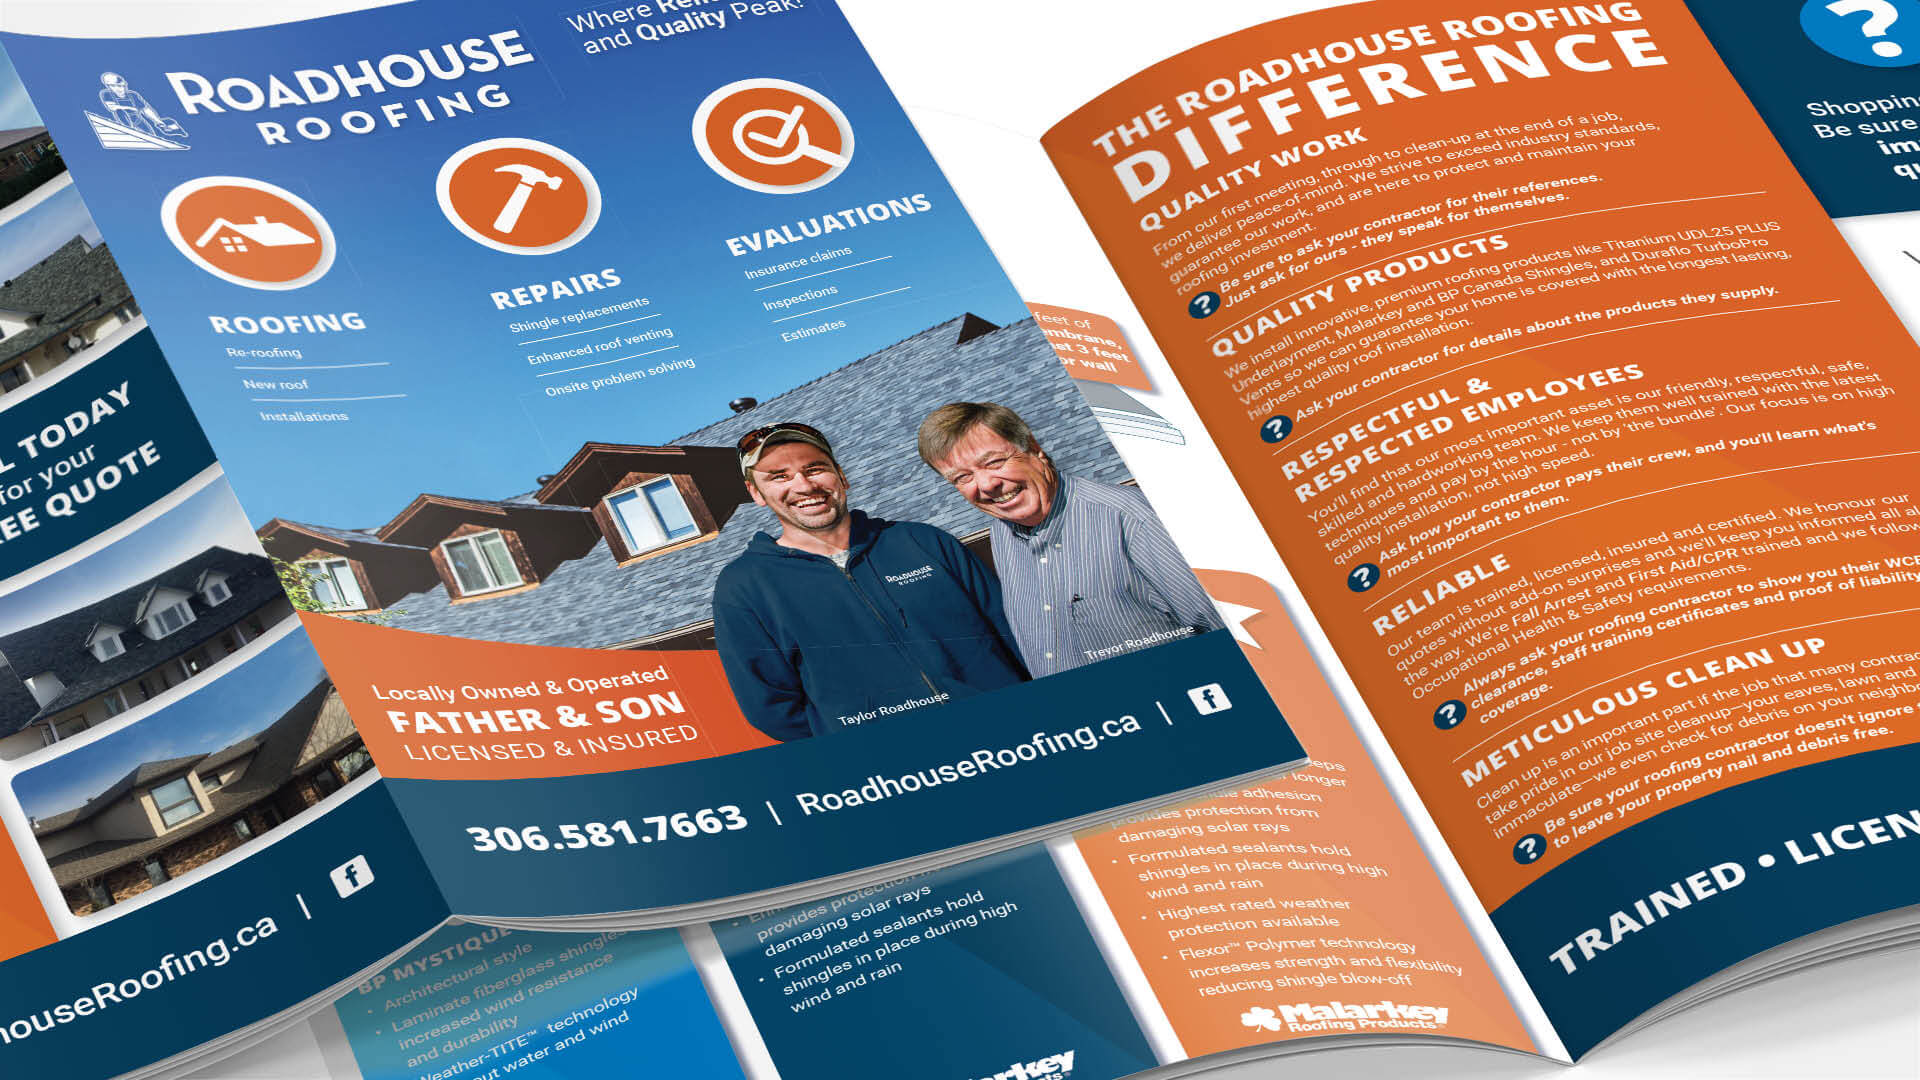 Roadhouse Roofing, Print, Roadhouse Roofing Brochure, Portfolio Image